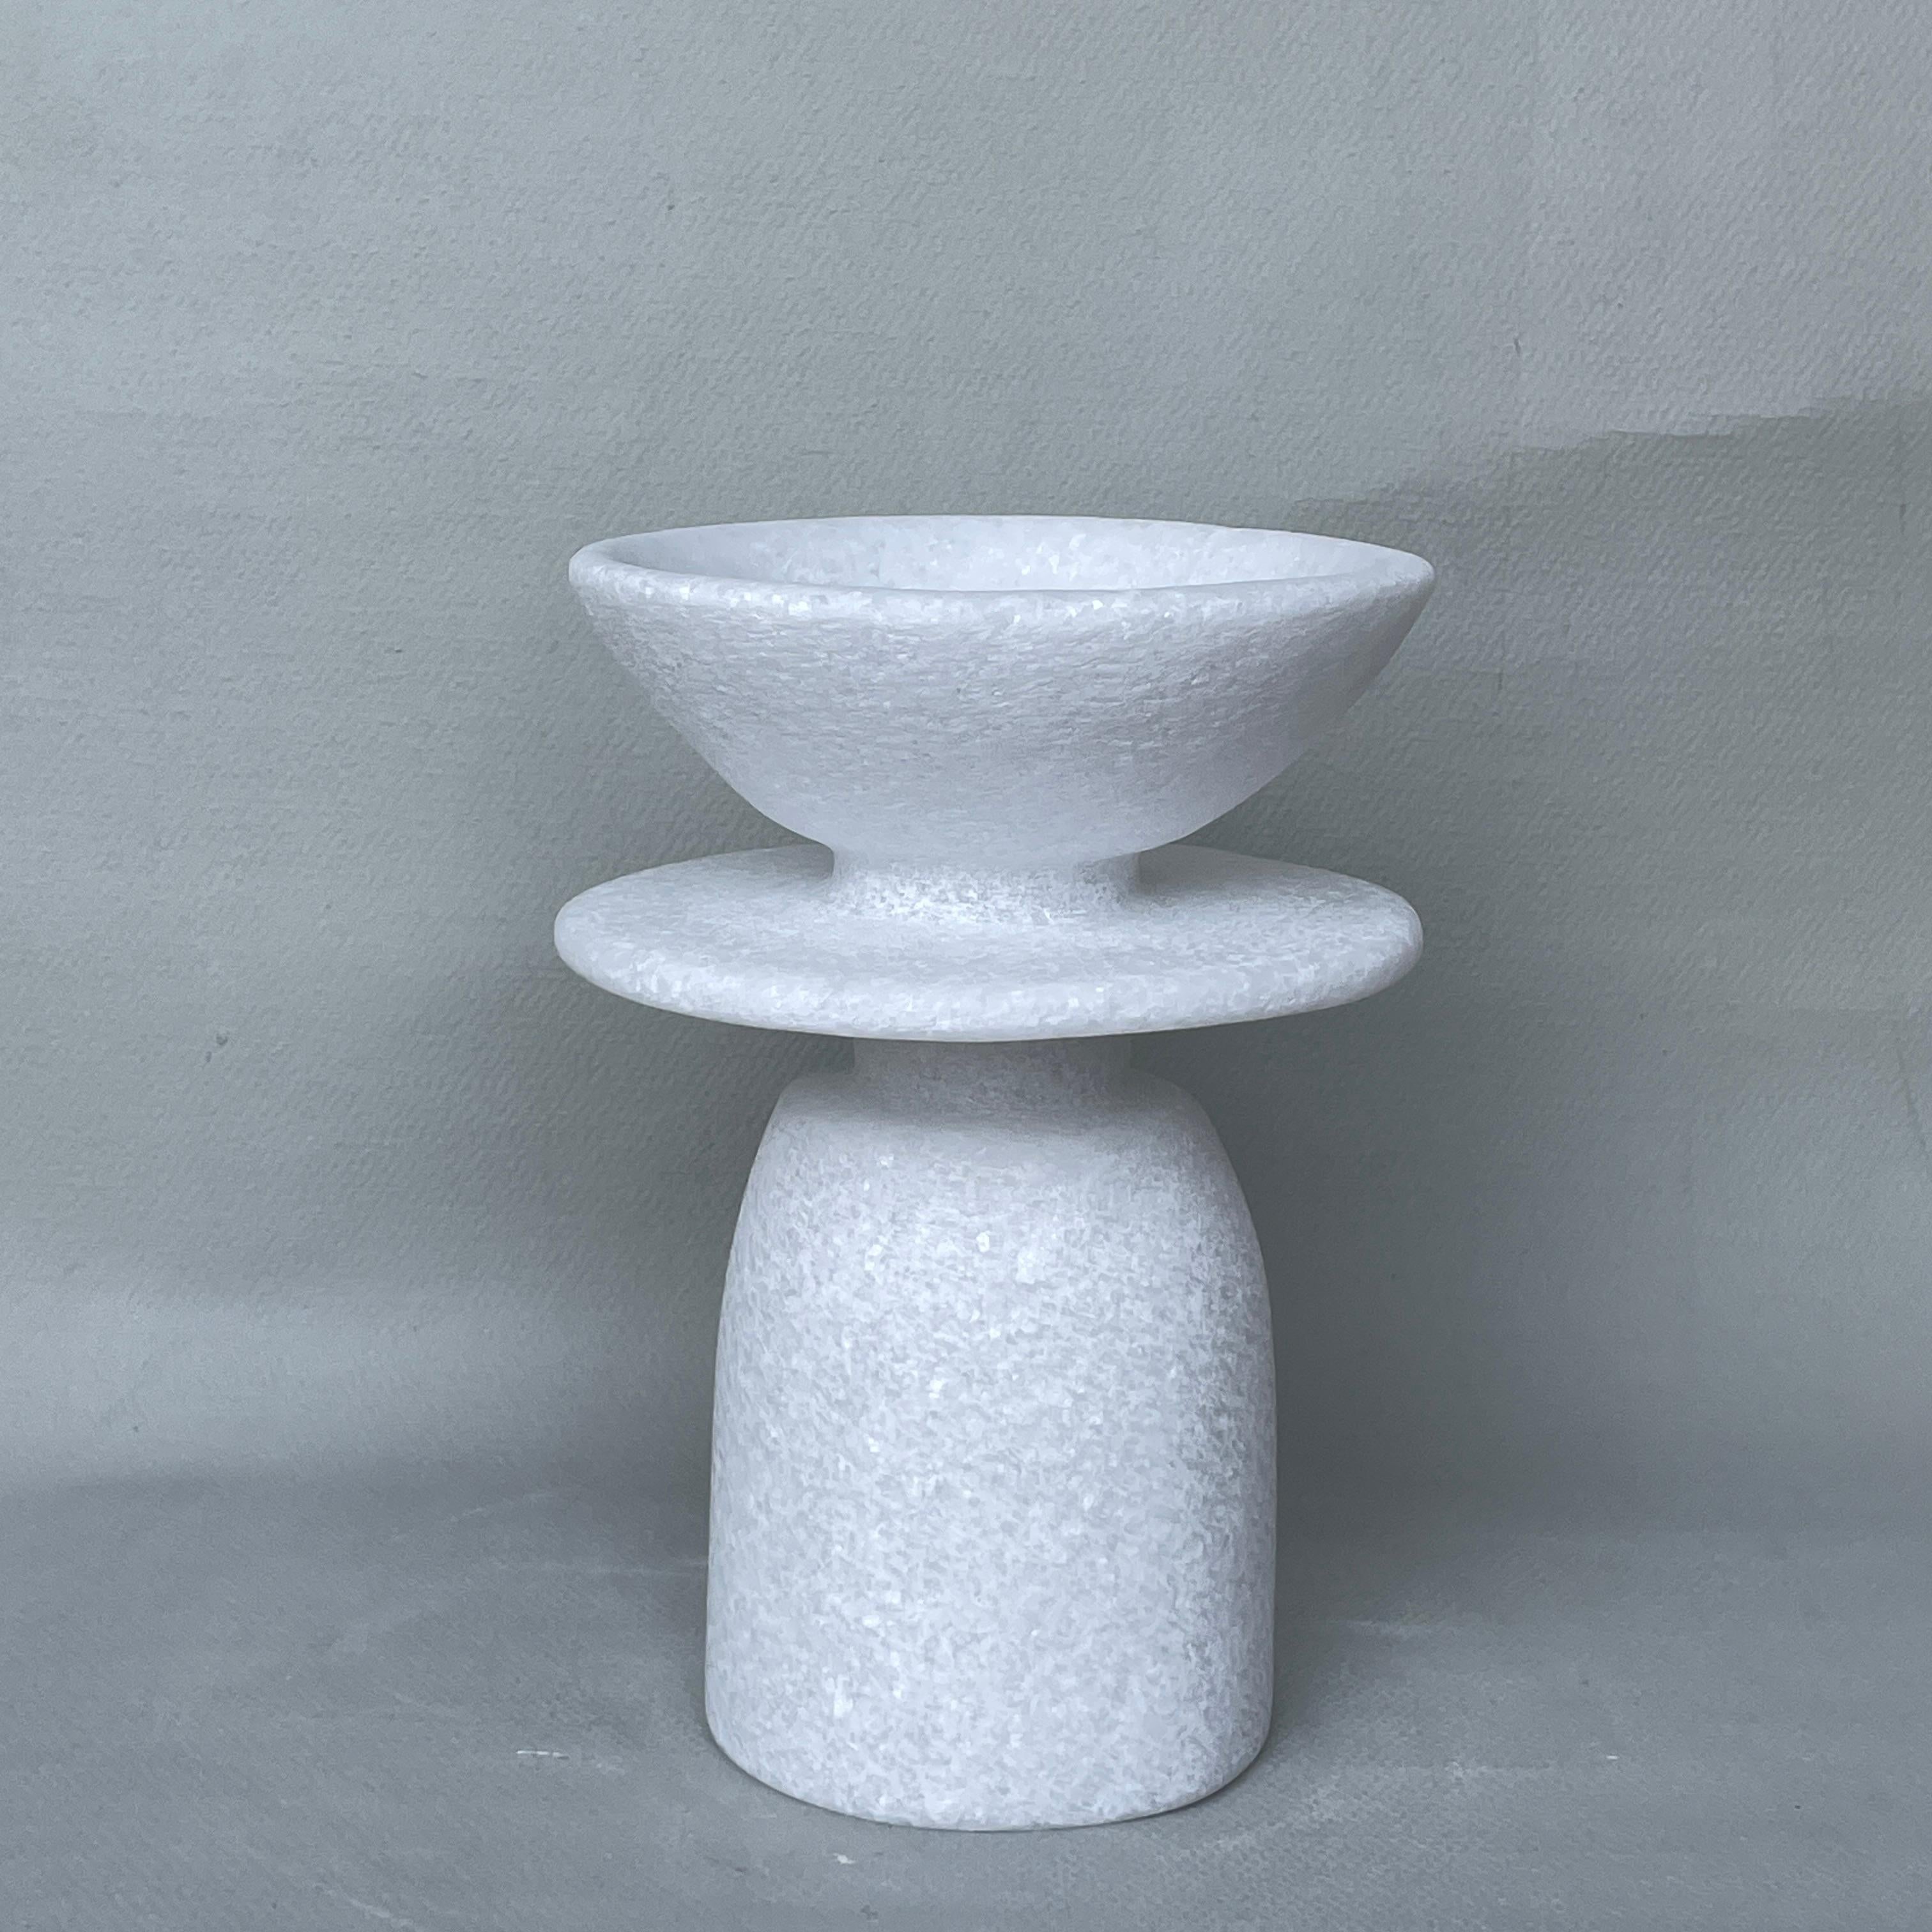 Unique Naxian Marble Vessel by Tom Von Kaenel
Unique piece.
Dimensions: Ø 12.5 x H 18 cm.
Materials: Naxian marble.

The surfaces of the objects are not sealed, they are not protected against acid. The lines of the handcraft are visible it